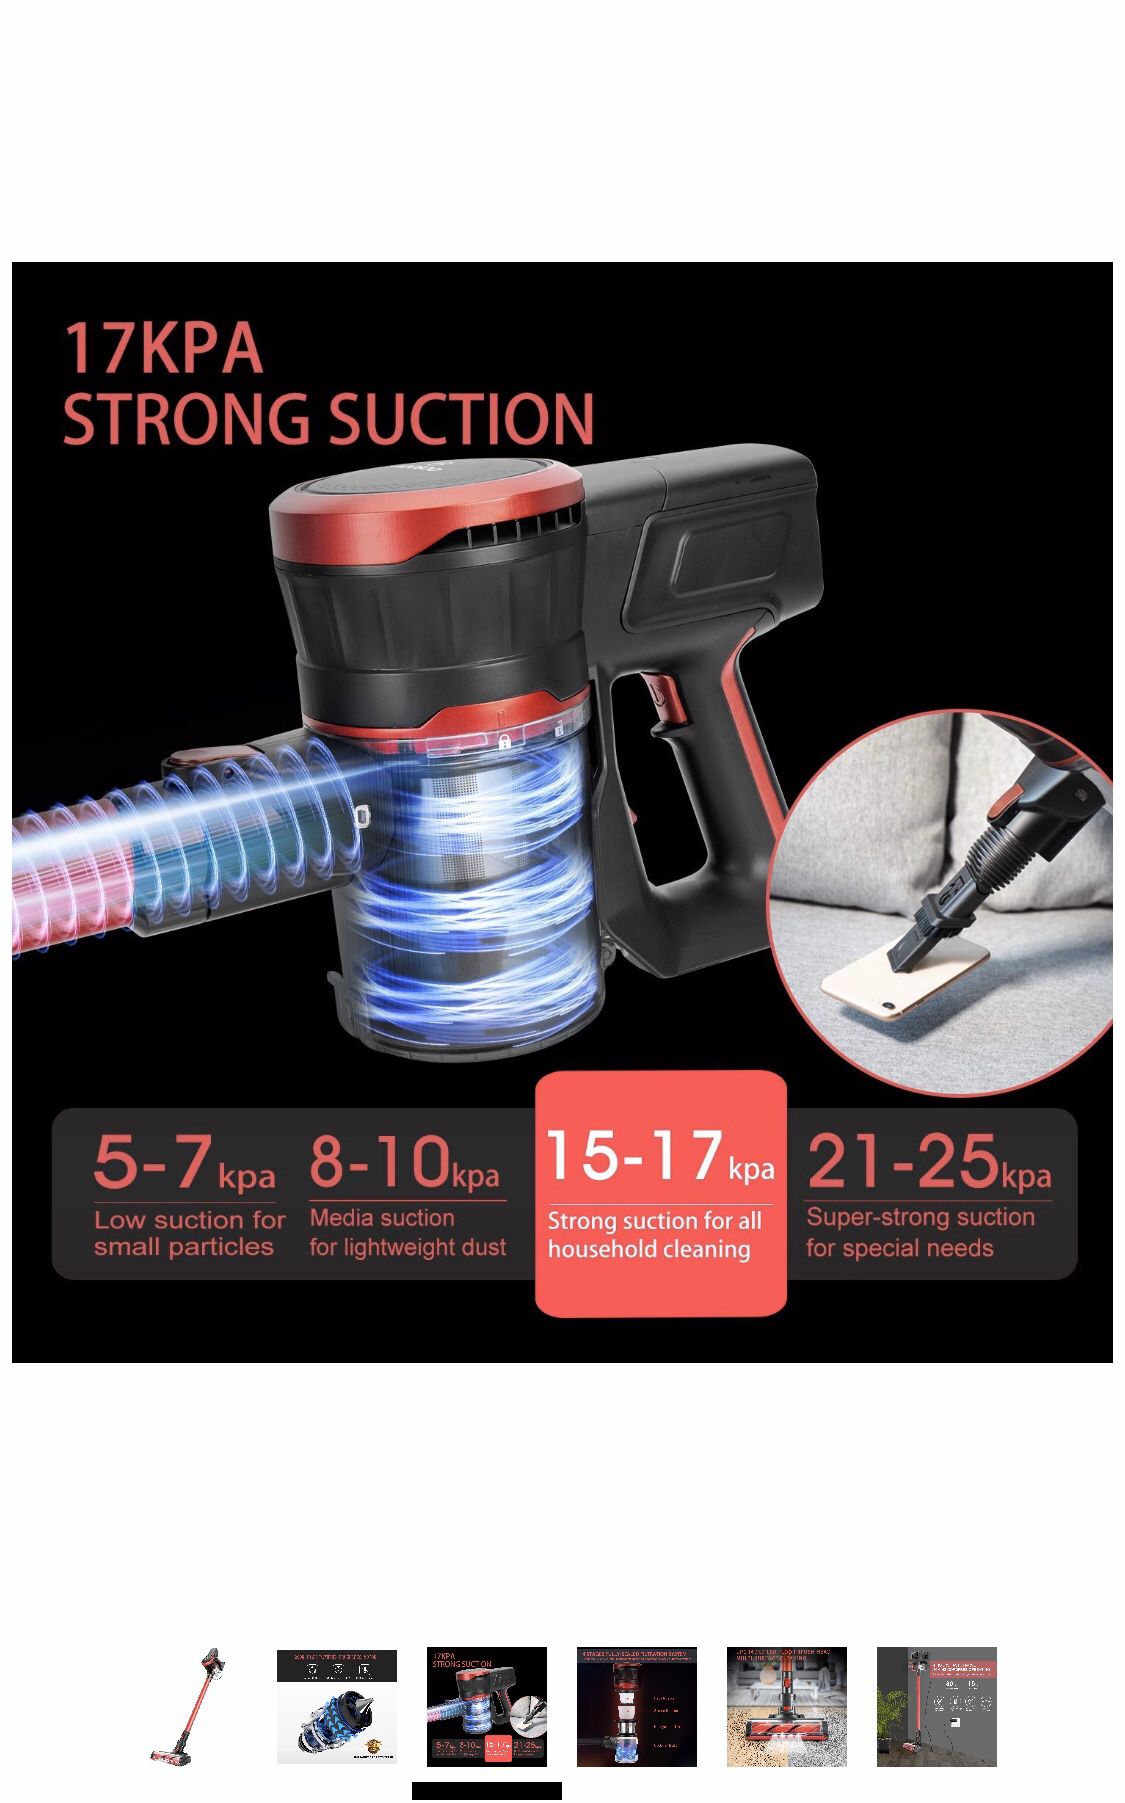 Cordless Vacuum Cleaner Strong 15Kpa 30mins with Advanced Brushless Motor LED 2500mAh 8-Cell Battery 2-in-1 Handheld Stick Vacuum